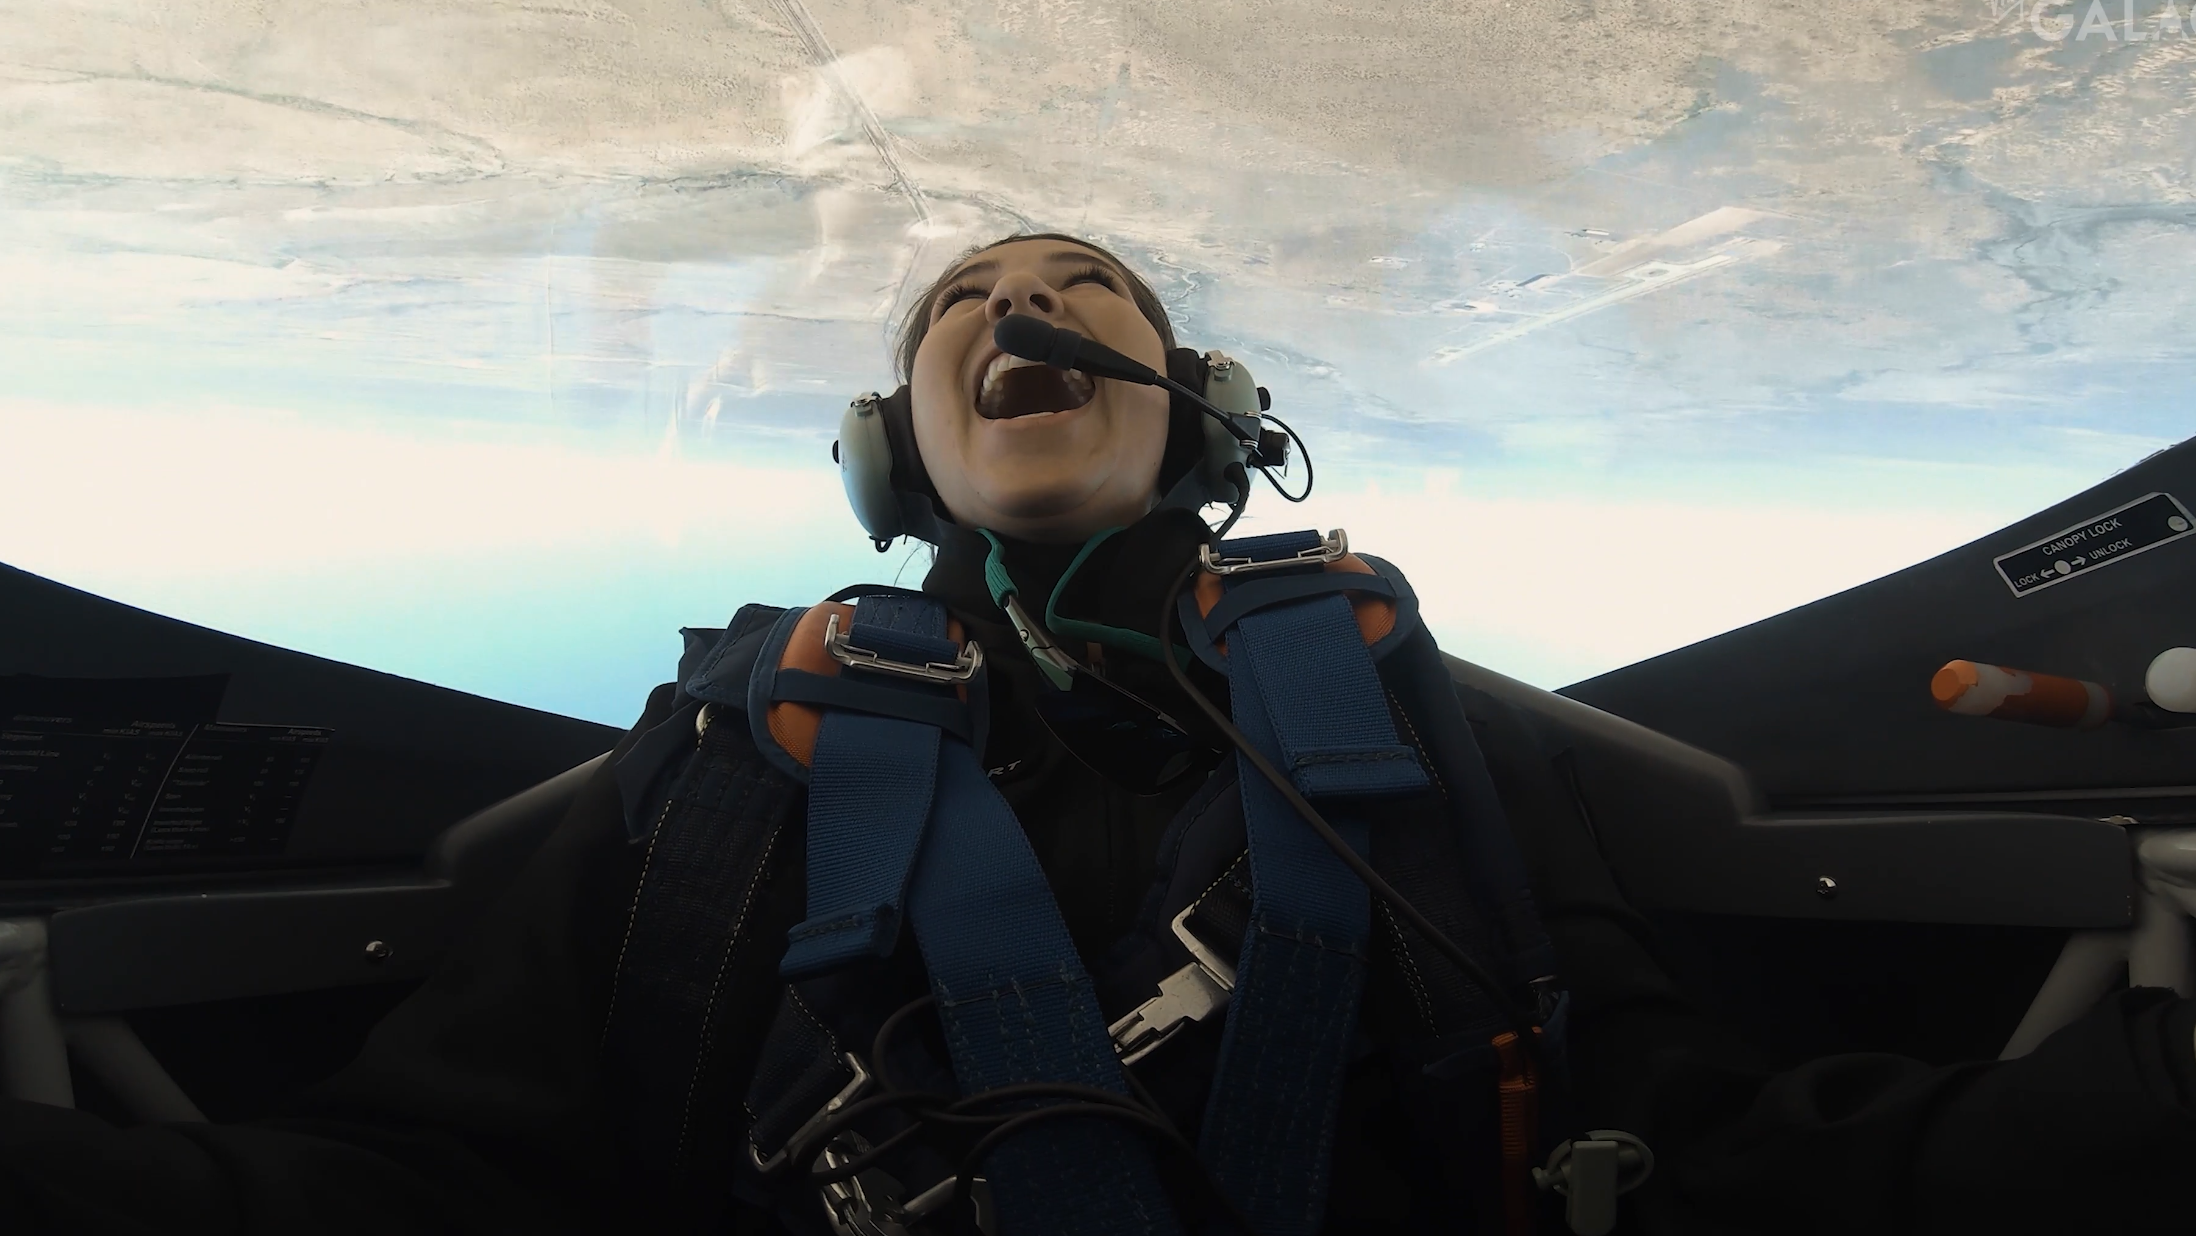 jamila gilbert in an upside-down cockpit with bubble shelter above and the ground visible in the window